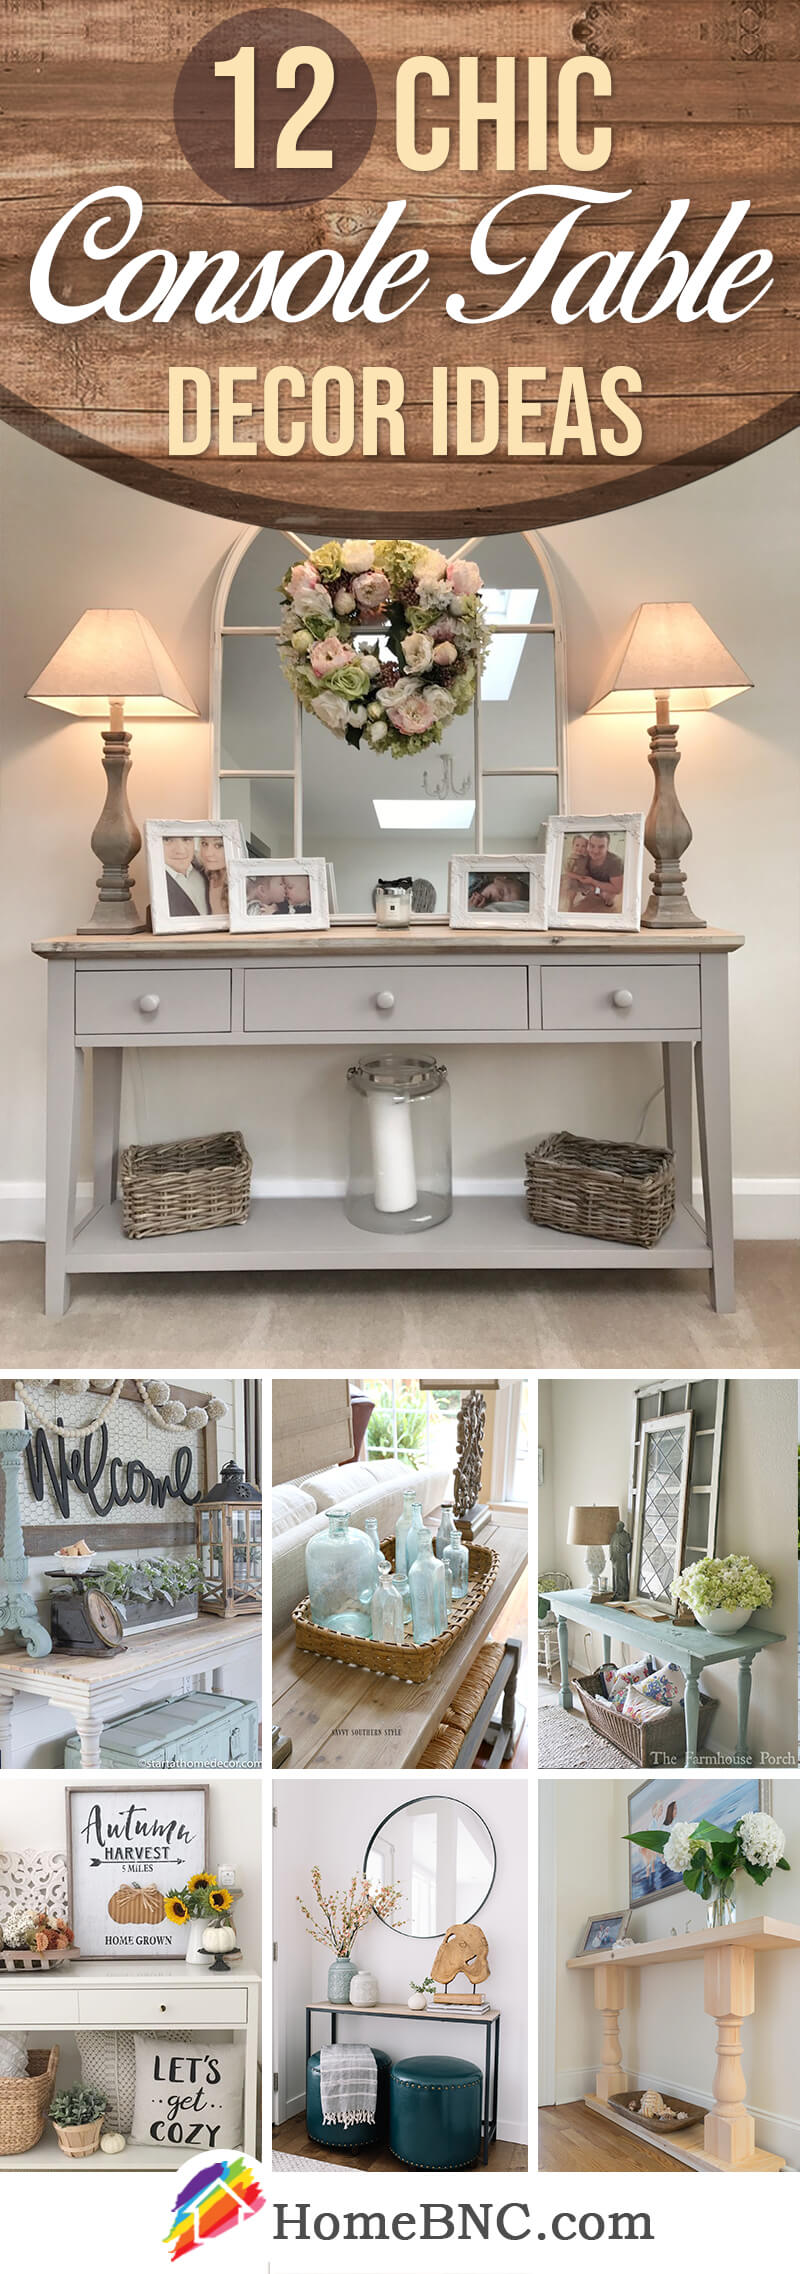 18 Best Console Table Decorating Ideas and Designs for 18